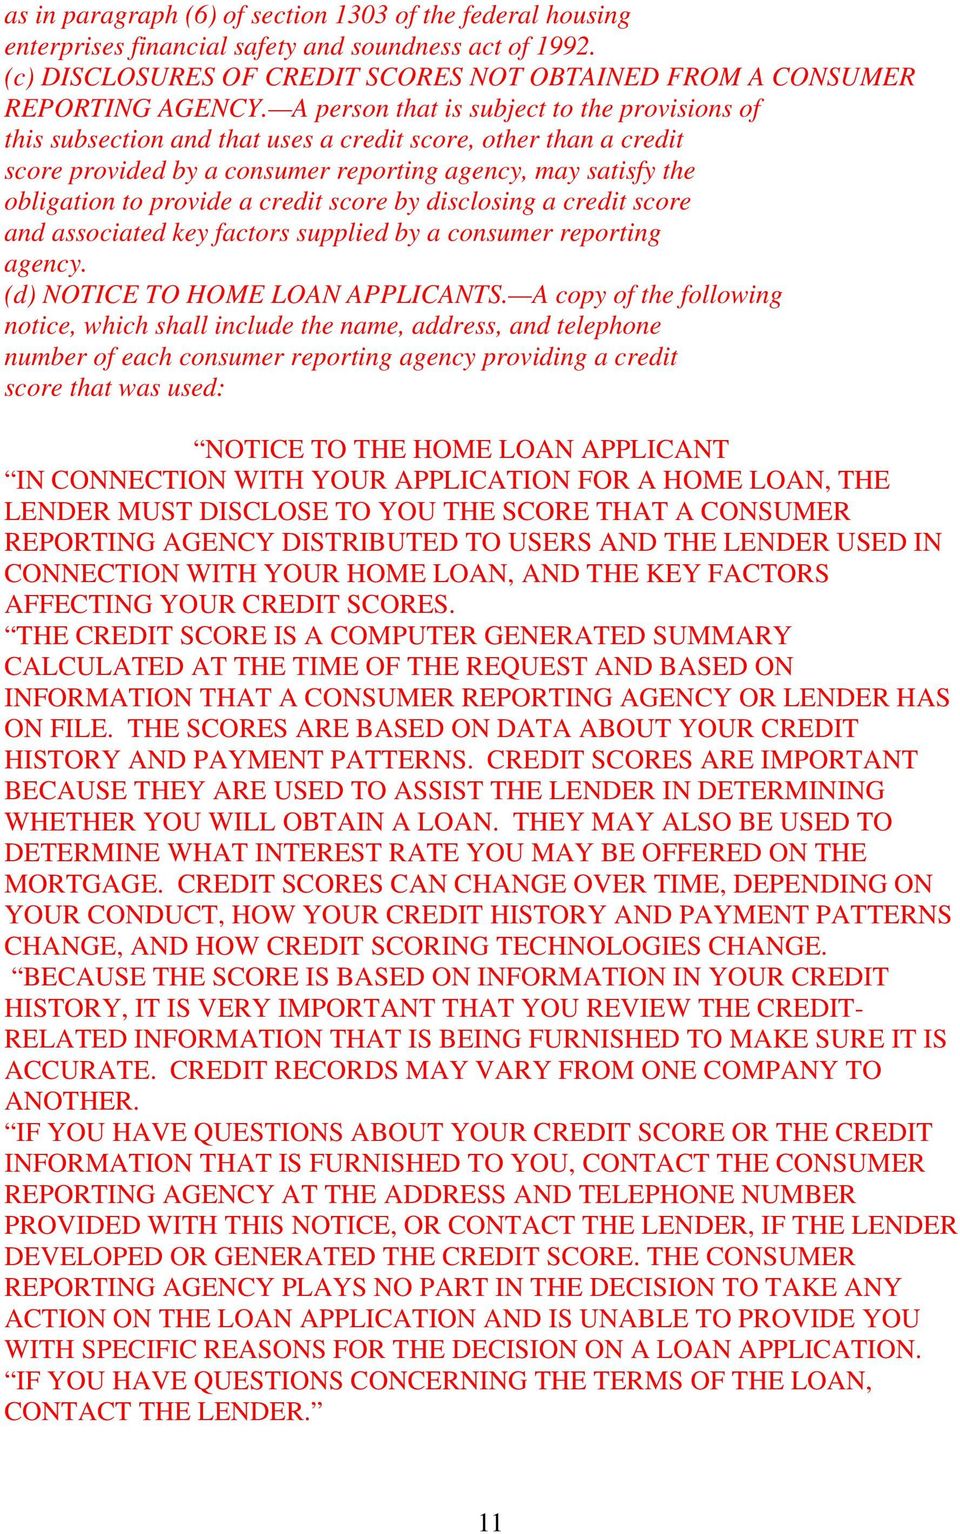 credit score by disclosing a credit score and associated key factors supplied by a consumer reporting agency. (d) NOTICE TO HOME LOAN APPLICANTS.